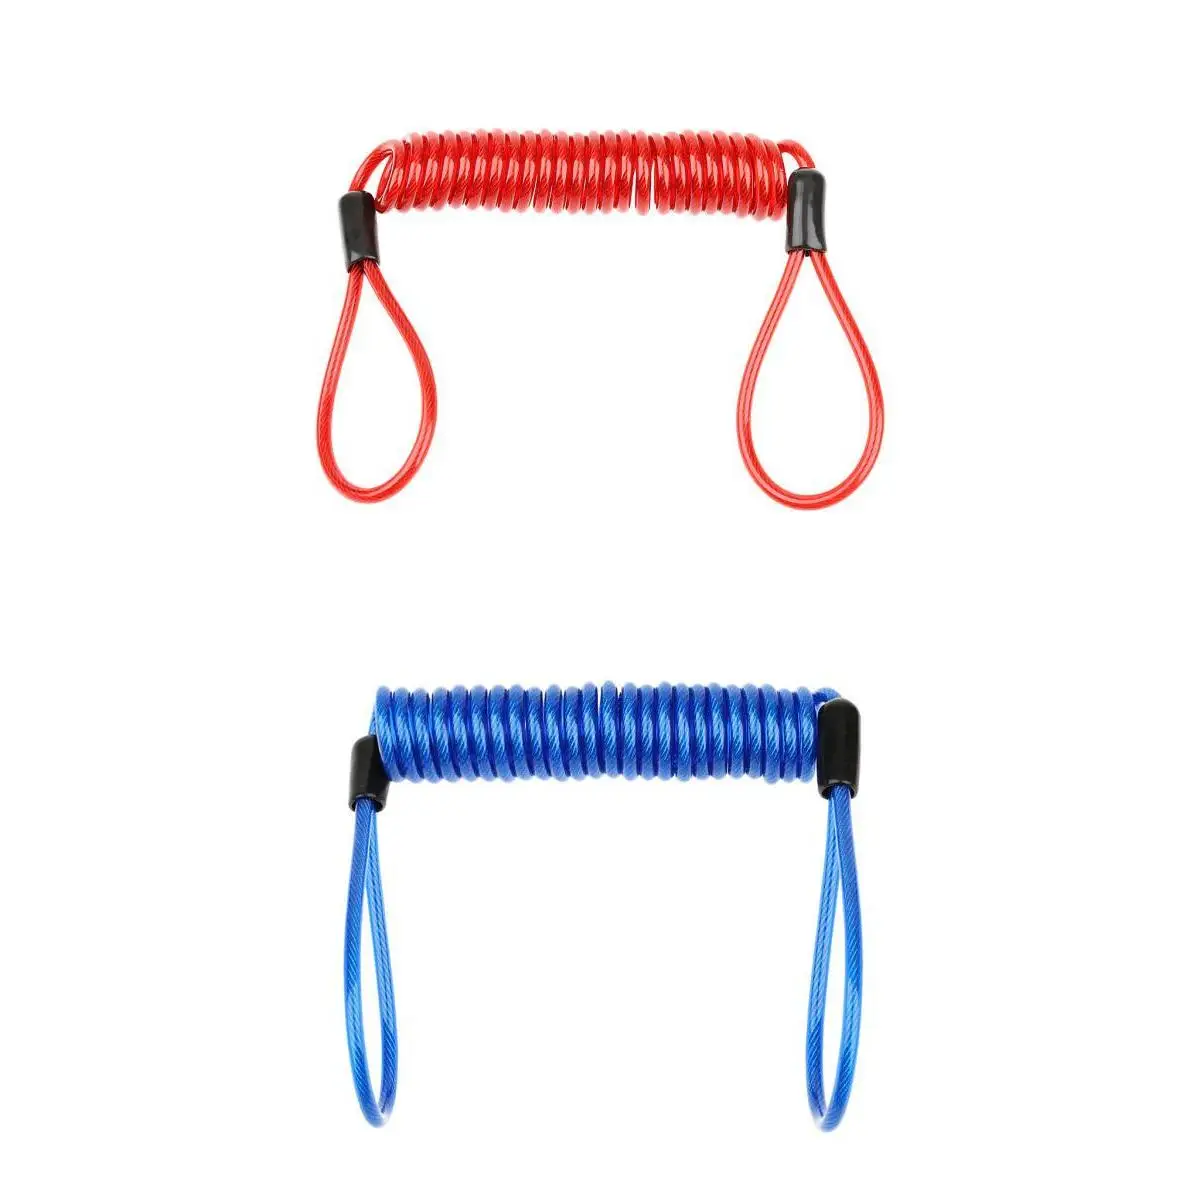 2Pcs Lightweight Lanyard Spring Coil Diver Snorkeling Rope Disc Brake Lock Great for Fishing, Can  the Rod Drop to The Water